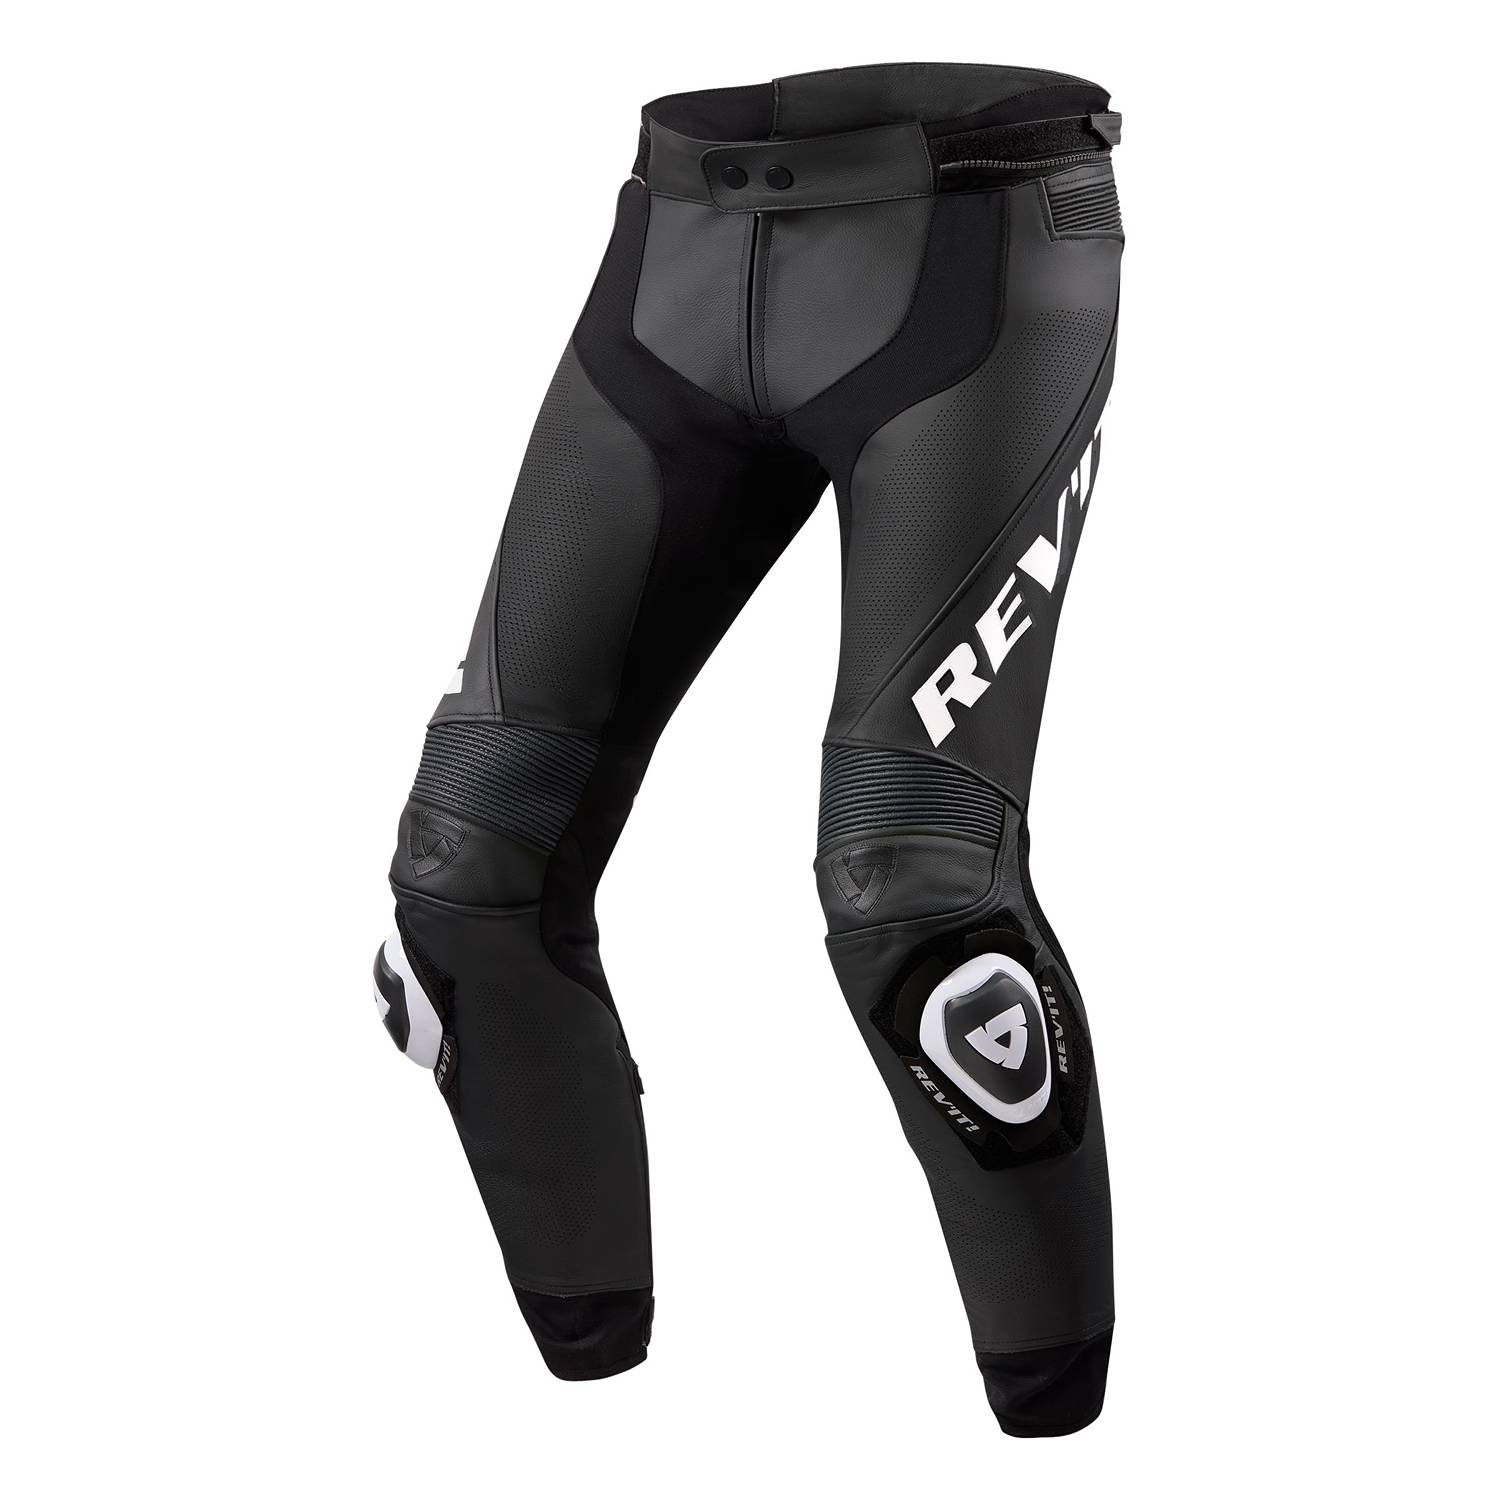 Image of REV'IT! Trousers Apex Black White Short Motorcycle Pants Size 48 ID 8700001315708